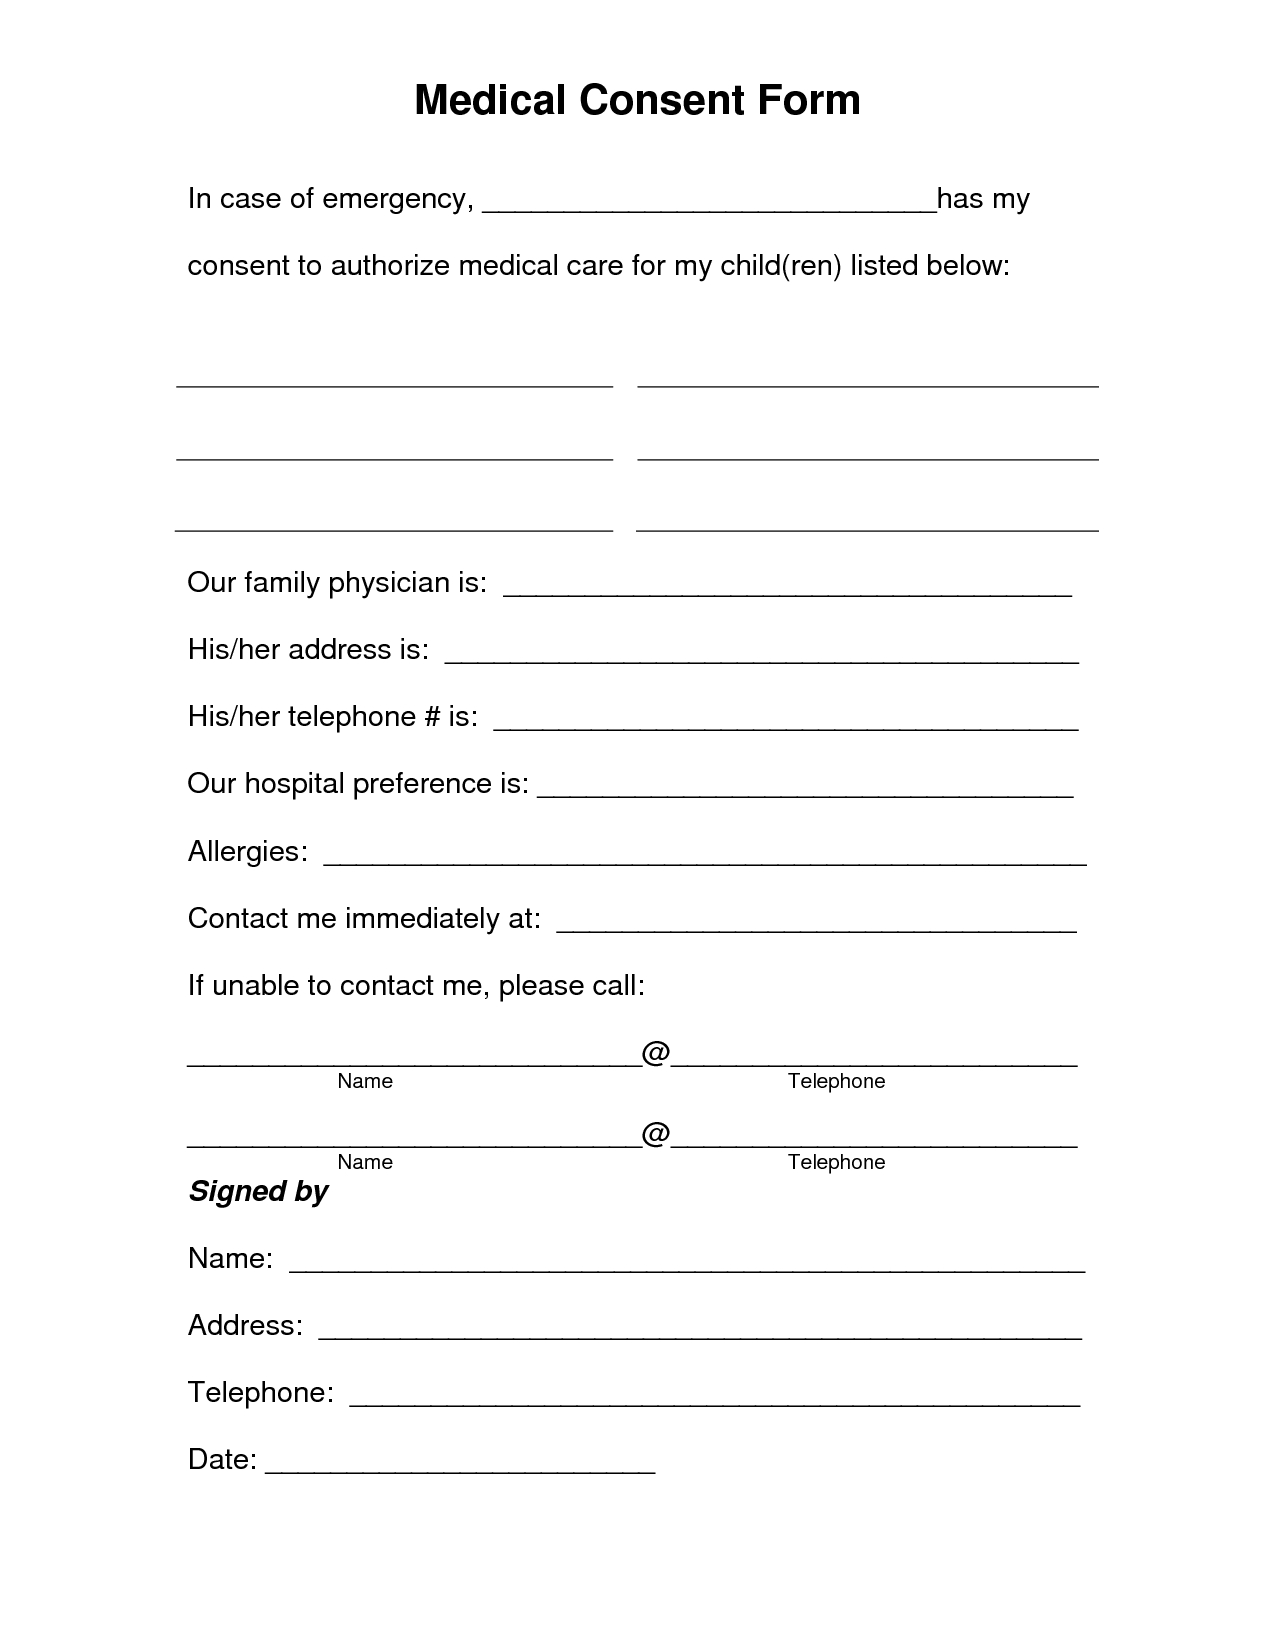 Free Printable Medical Consent Form | Free Medical Consent Form - Free Printable Medical Forms